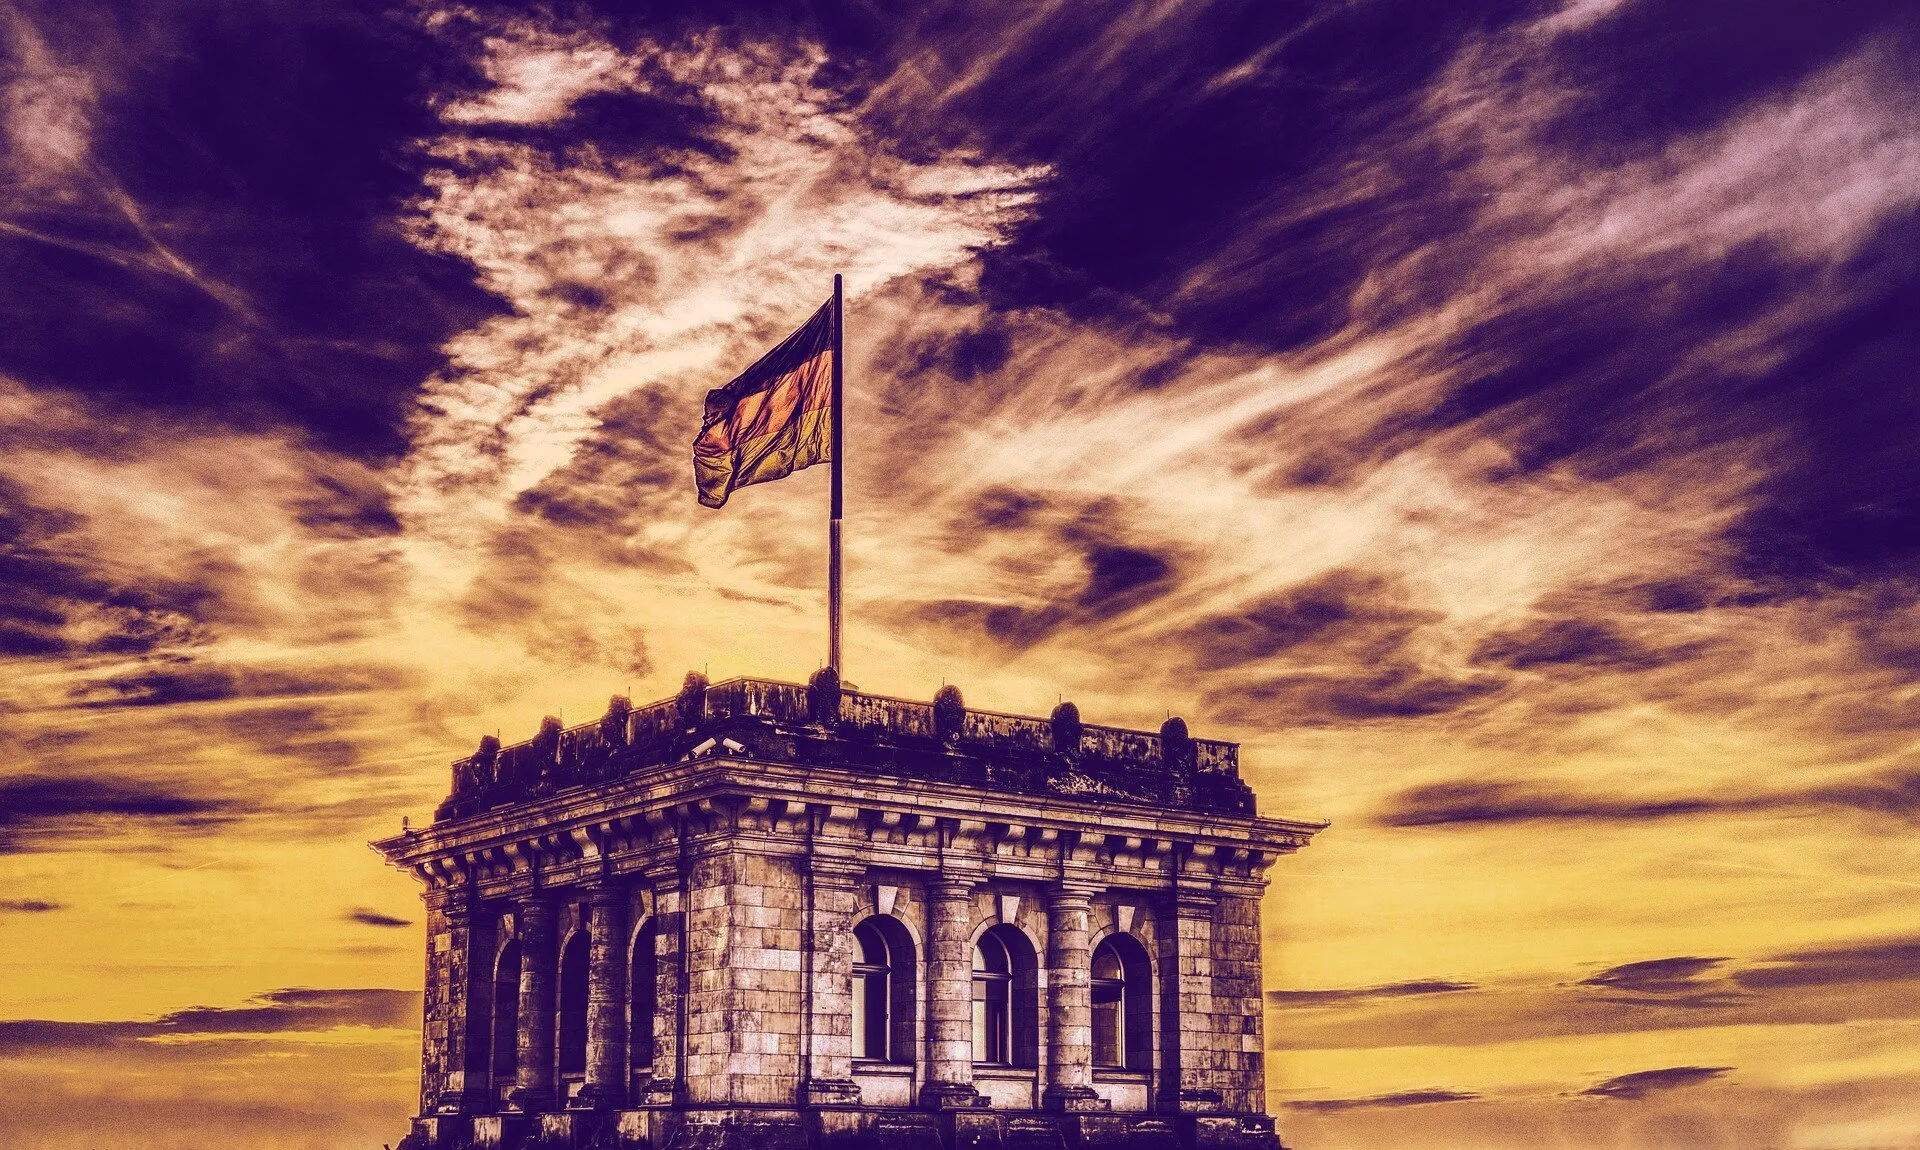 Germany has passed a series of laws to legitimize digital assets. Image: Shutterstock